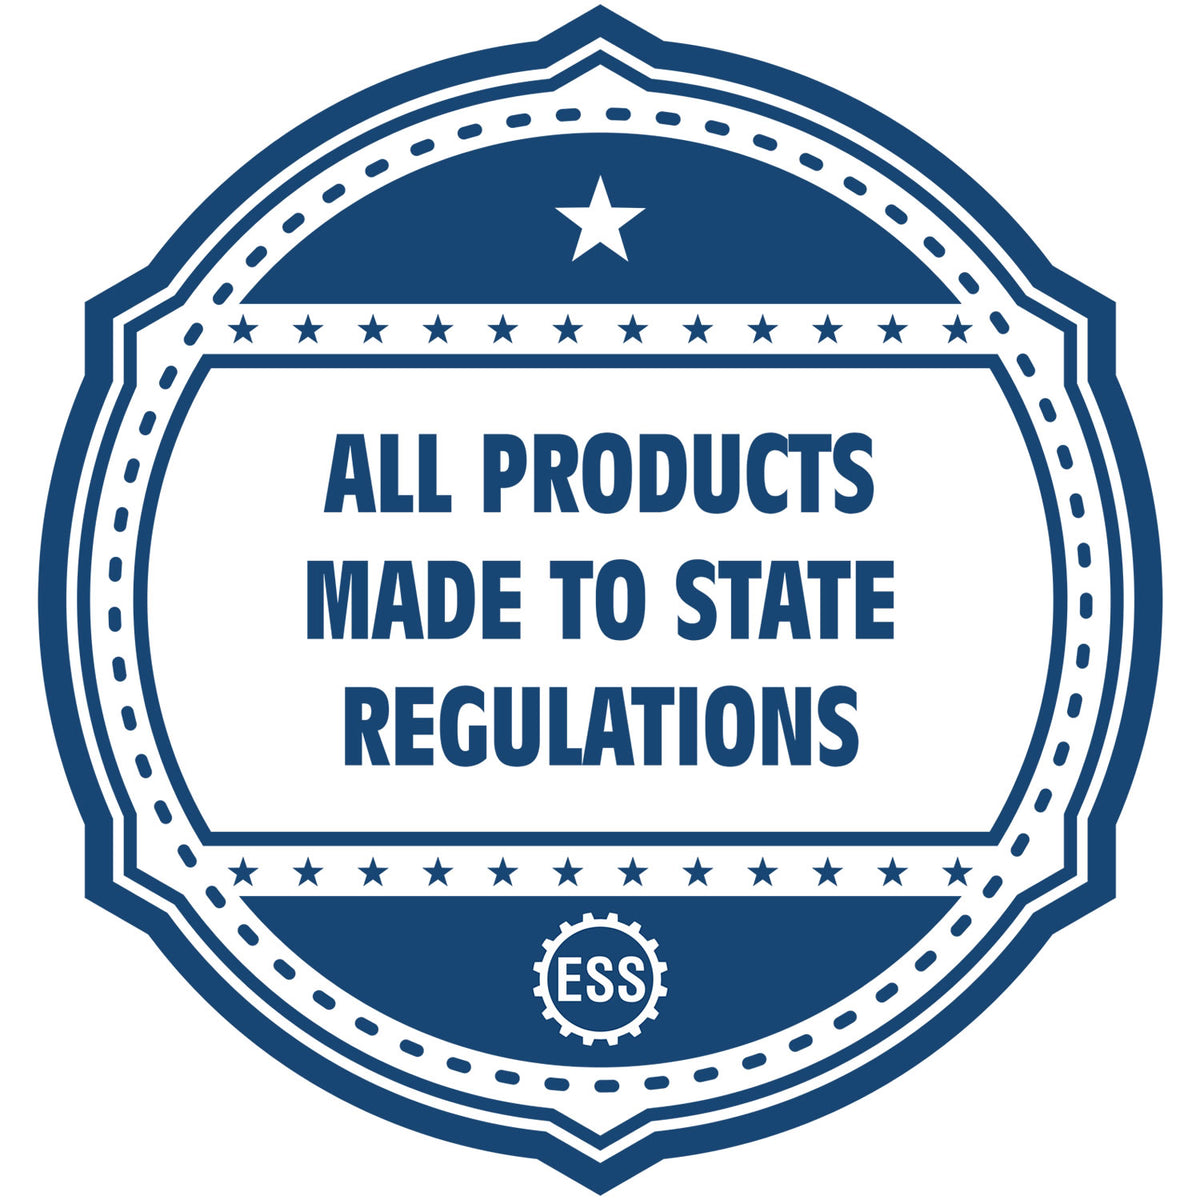 An icon or badge element for the Self-Inking Utah Landscape Architect Stamp showing that this product is made in compliance with state regulations.